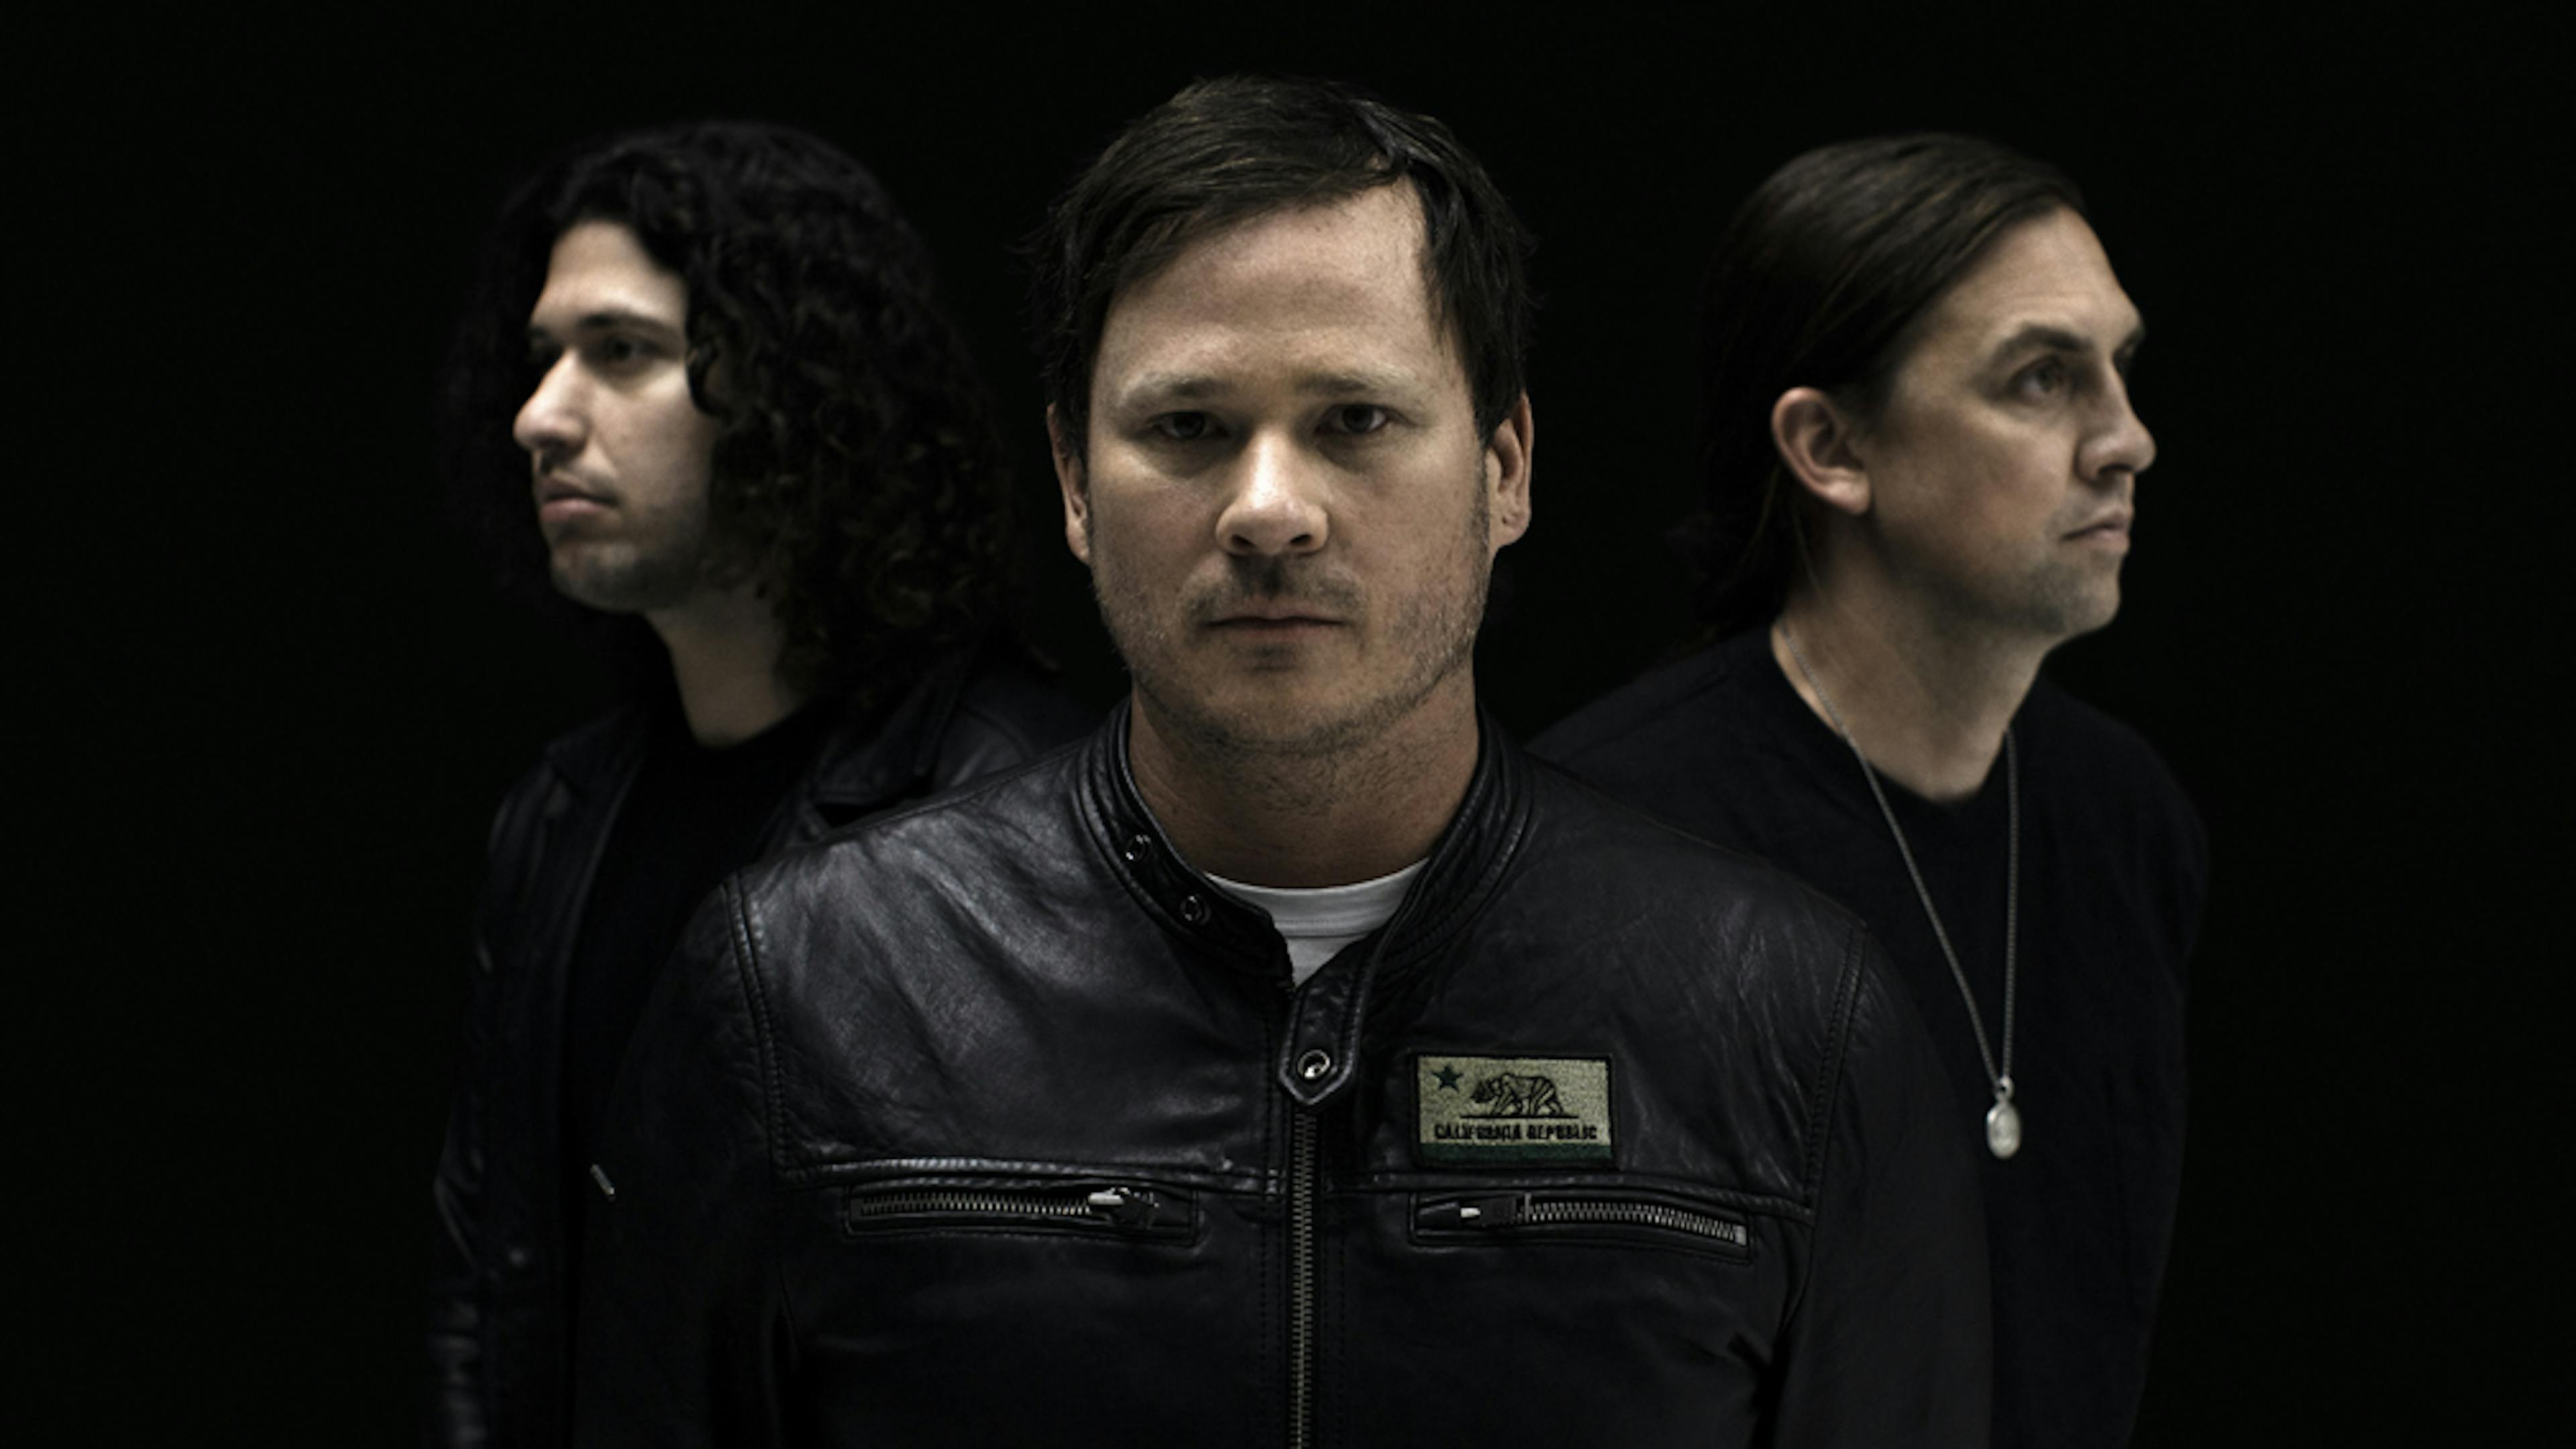 Tom DeLonge On Angels & Airwaves’ Return: “Music Is My Life And Who I Am”